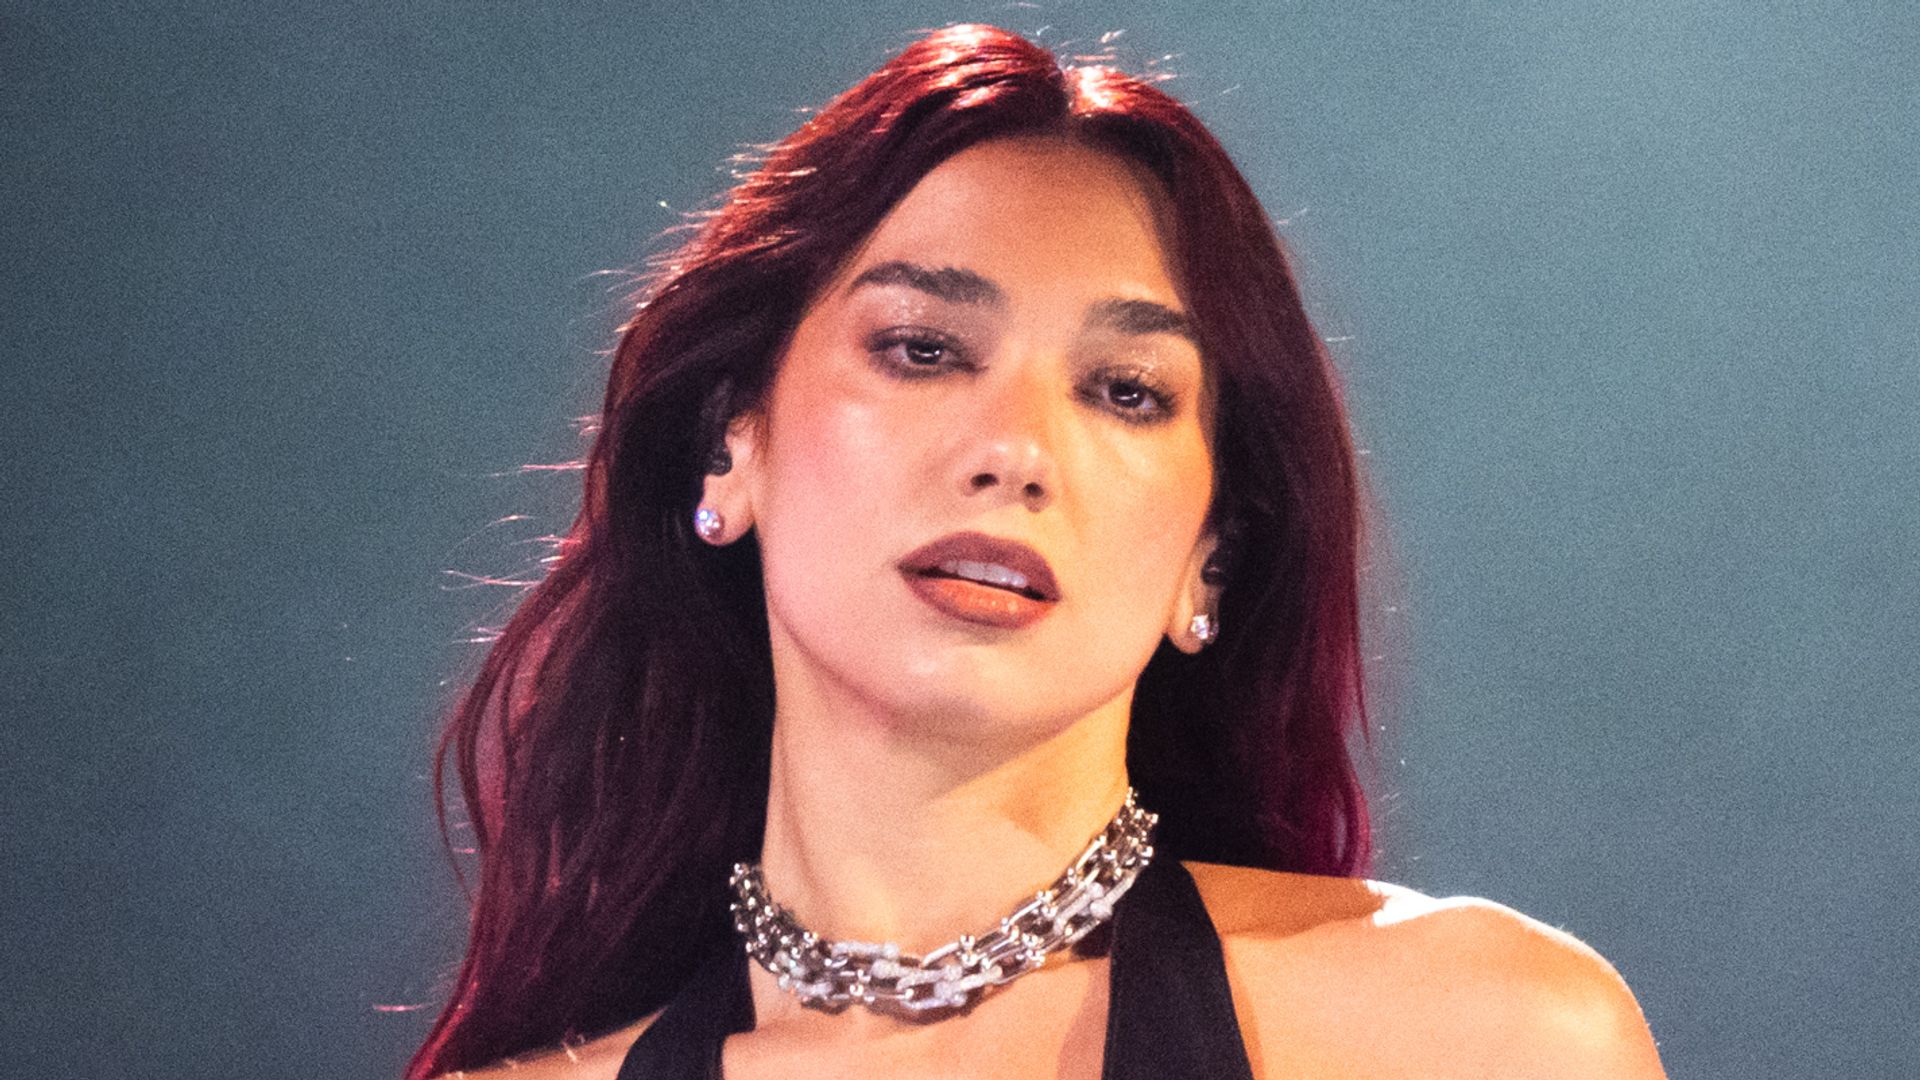 Dua on stage in a leather dress with chains